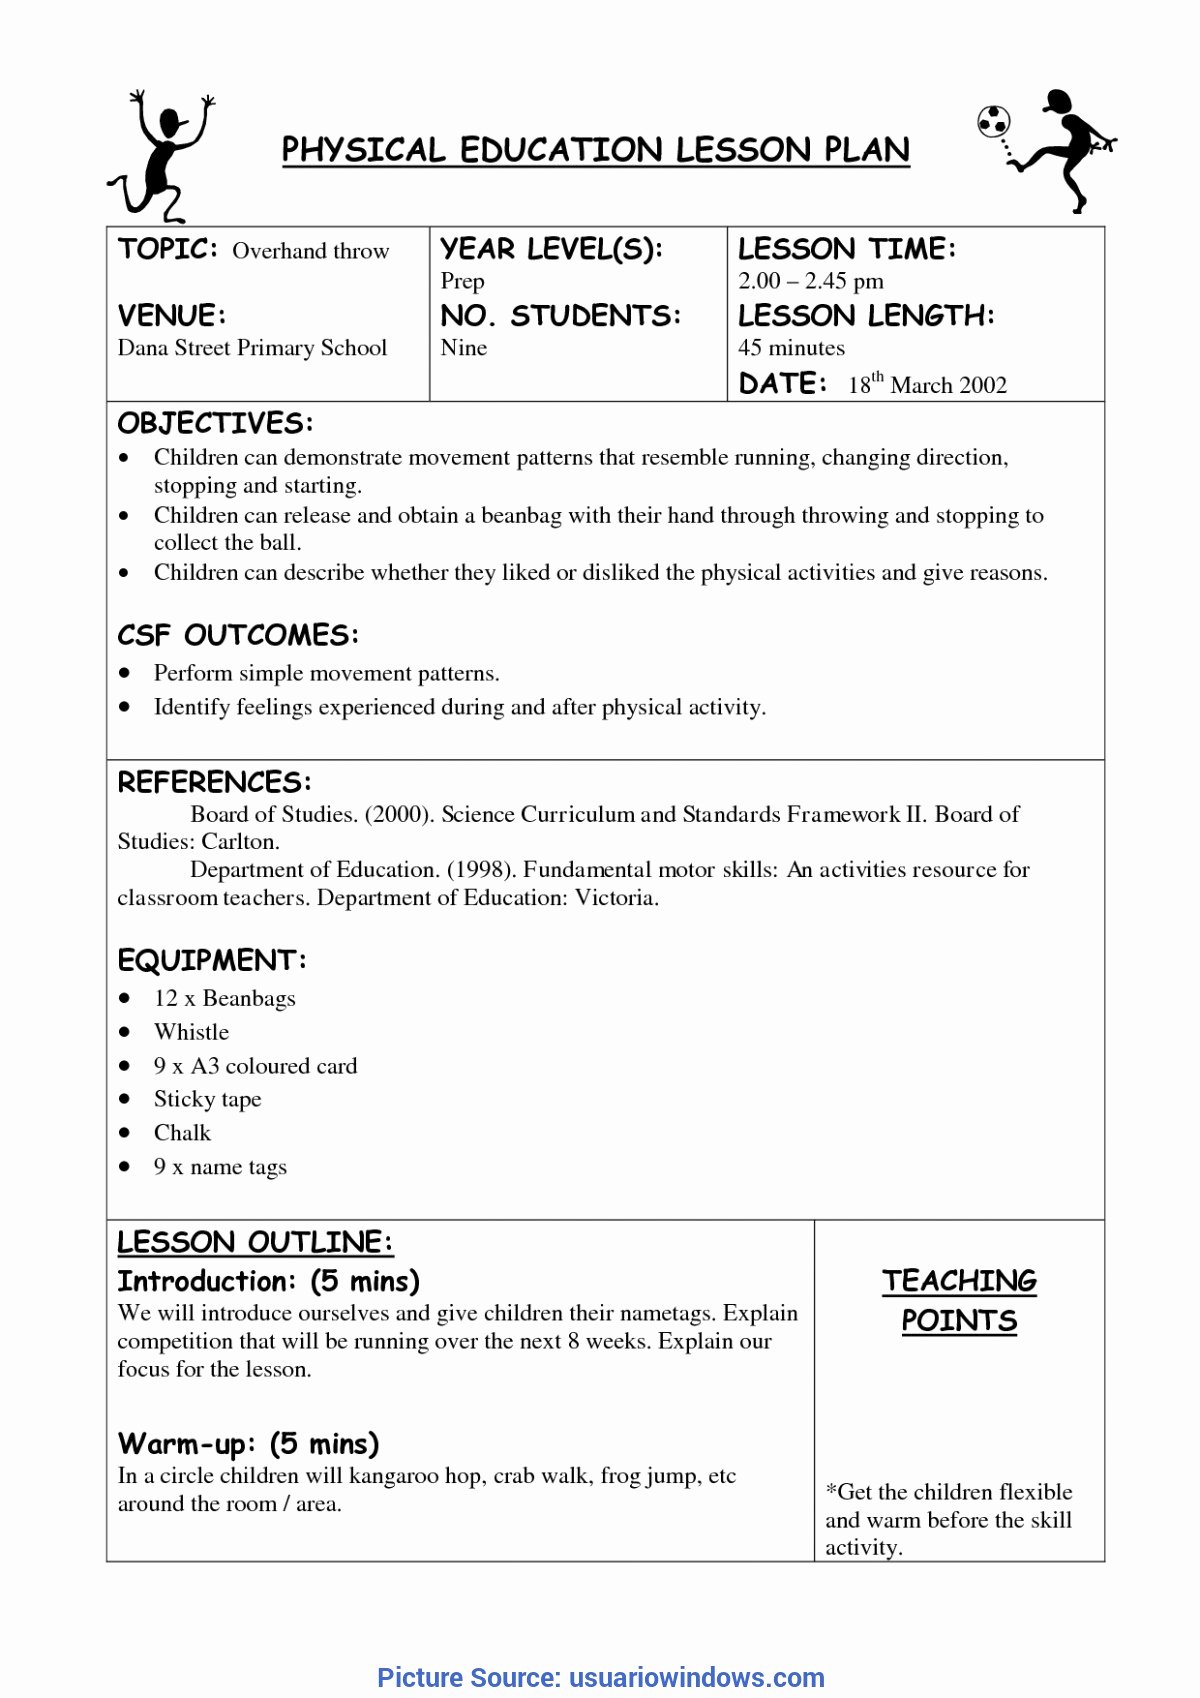 Physical Education Lesson Plan Template Inspirational Useful the Art Education Lesson Plans Pattern Monsters